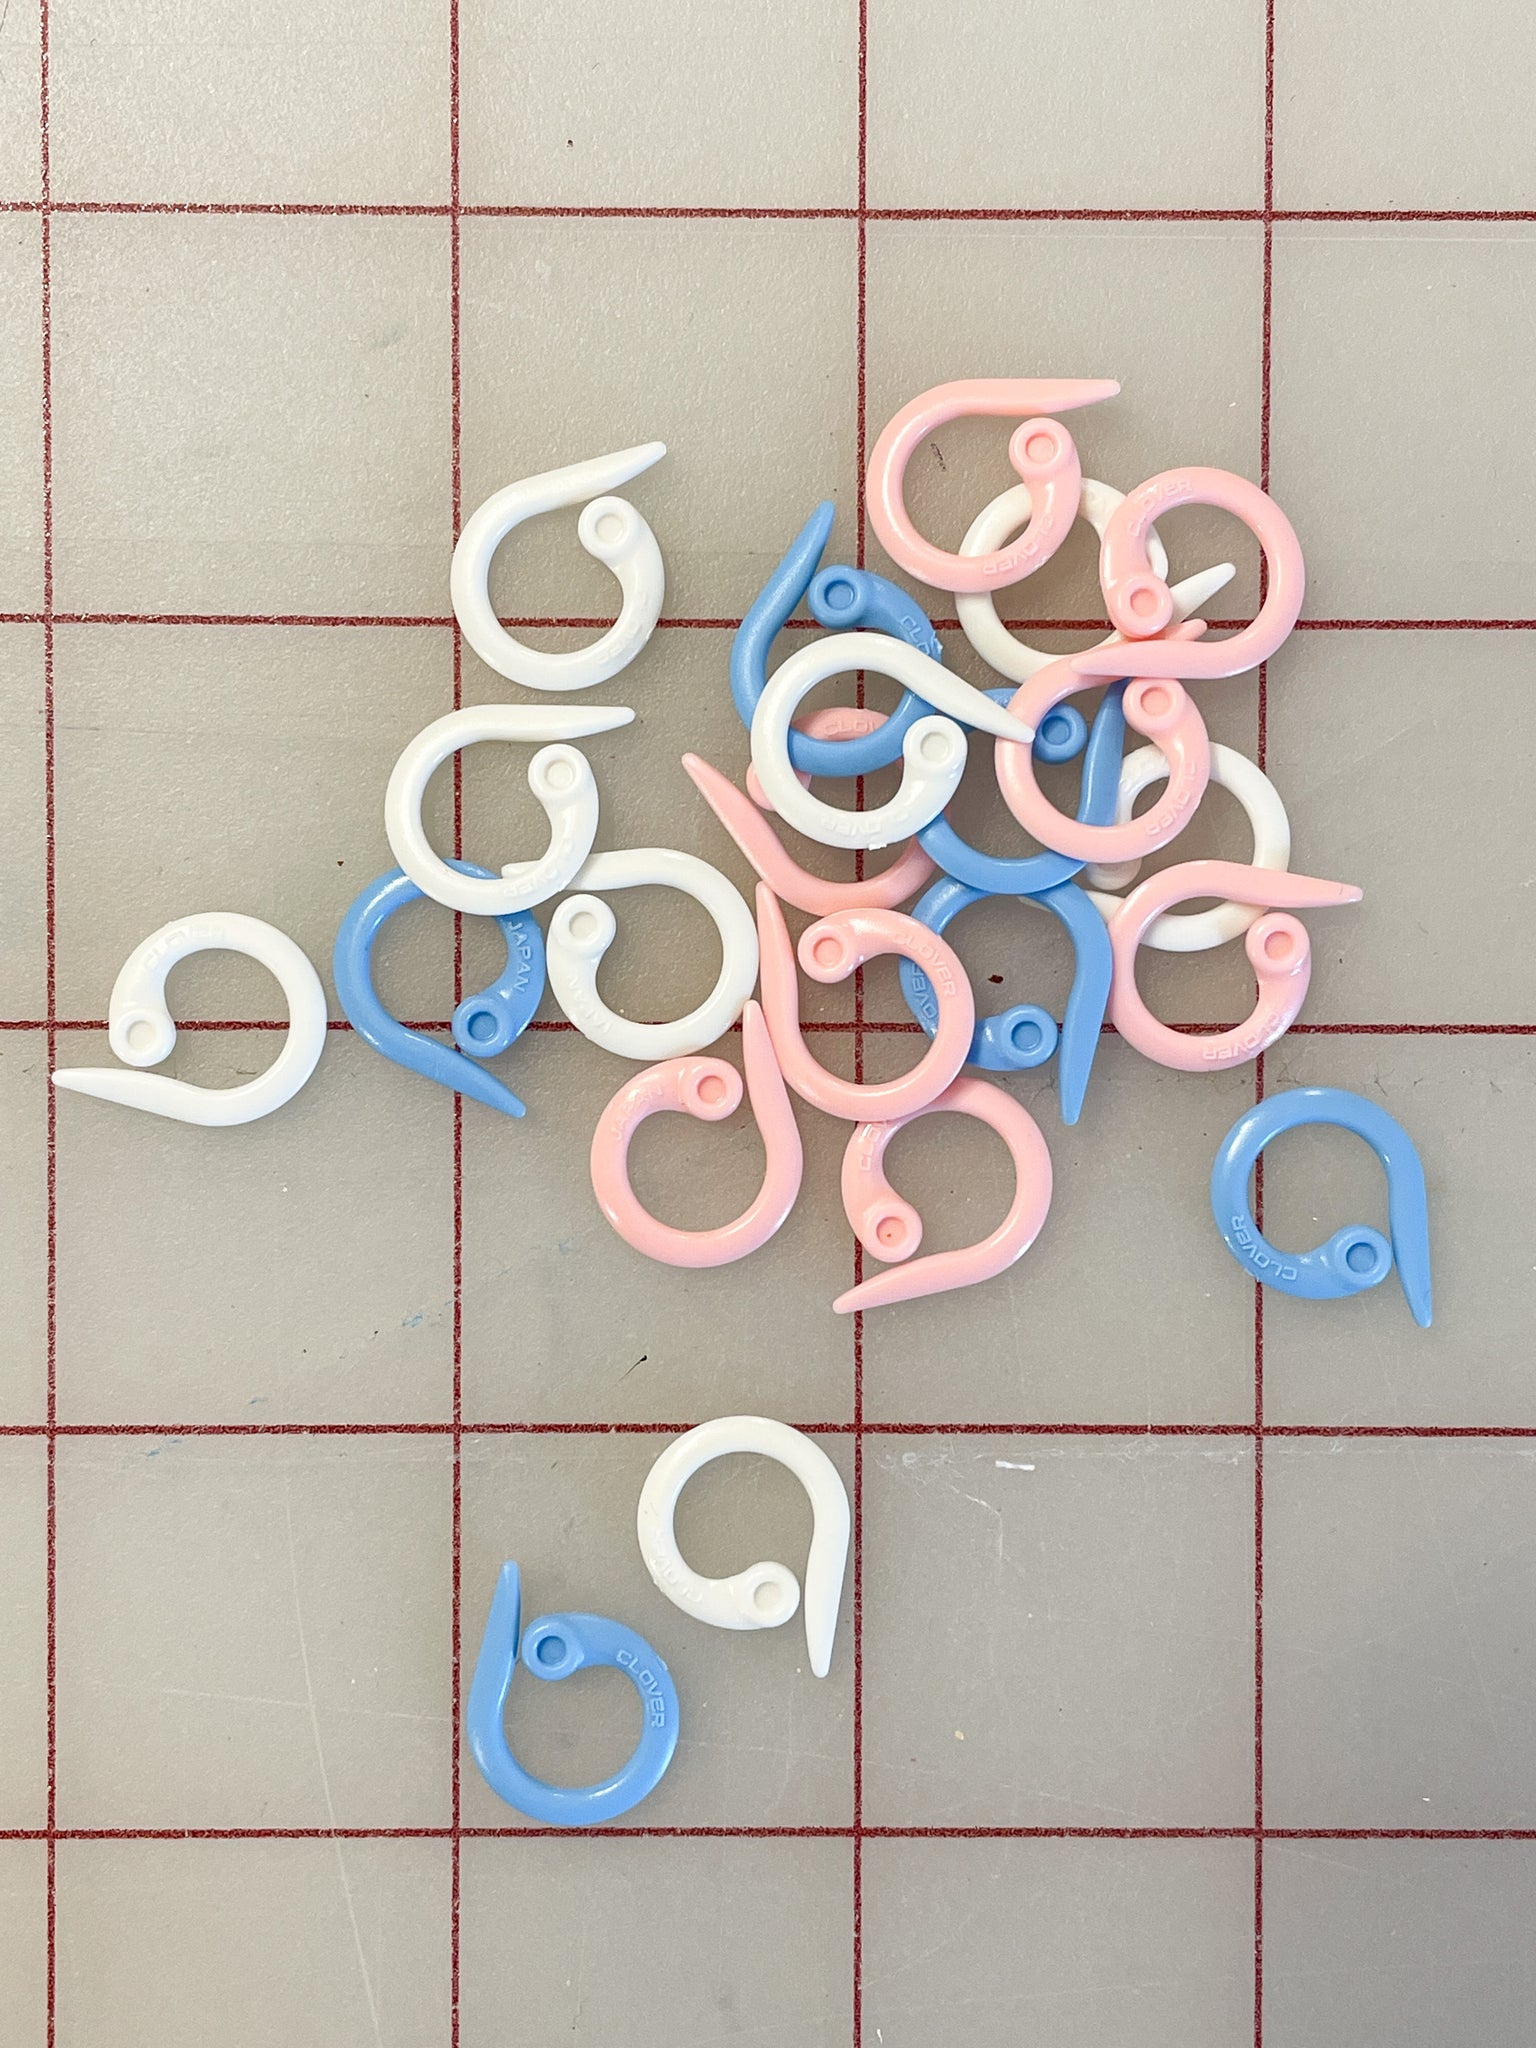 SALE Stitch Markers Plastic Set of 22 - Pink, White and Blue